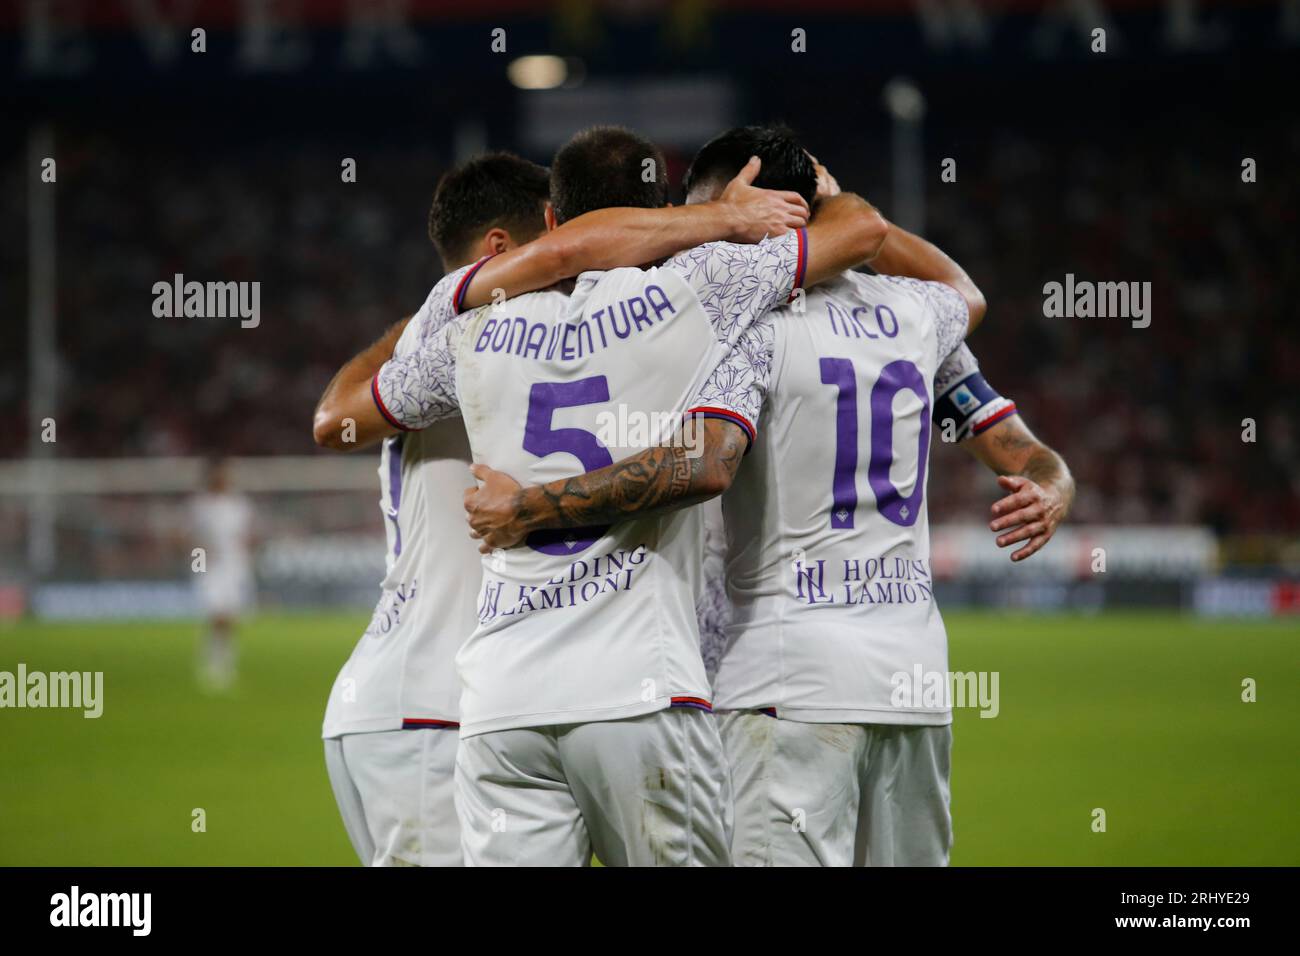 Nicolas Gonzalez of Acf Fiorentina Celebrating with team mates during the Italian Serie A, football match between Genoa Cfc and Acf Fiorentina on 19 A Stock Photo